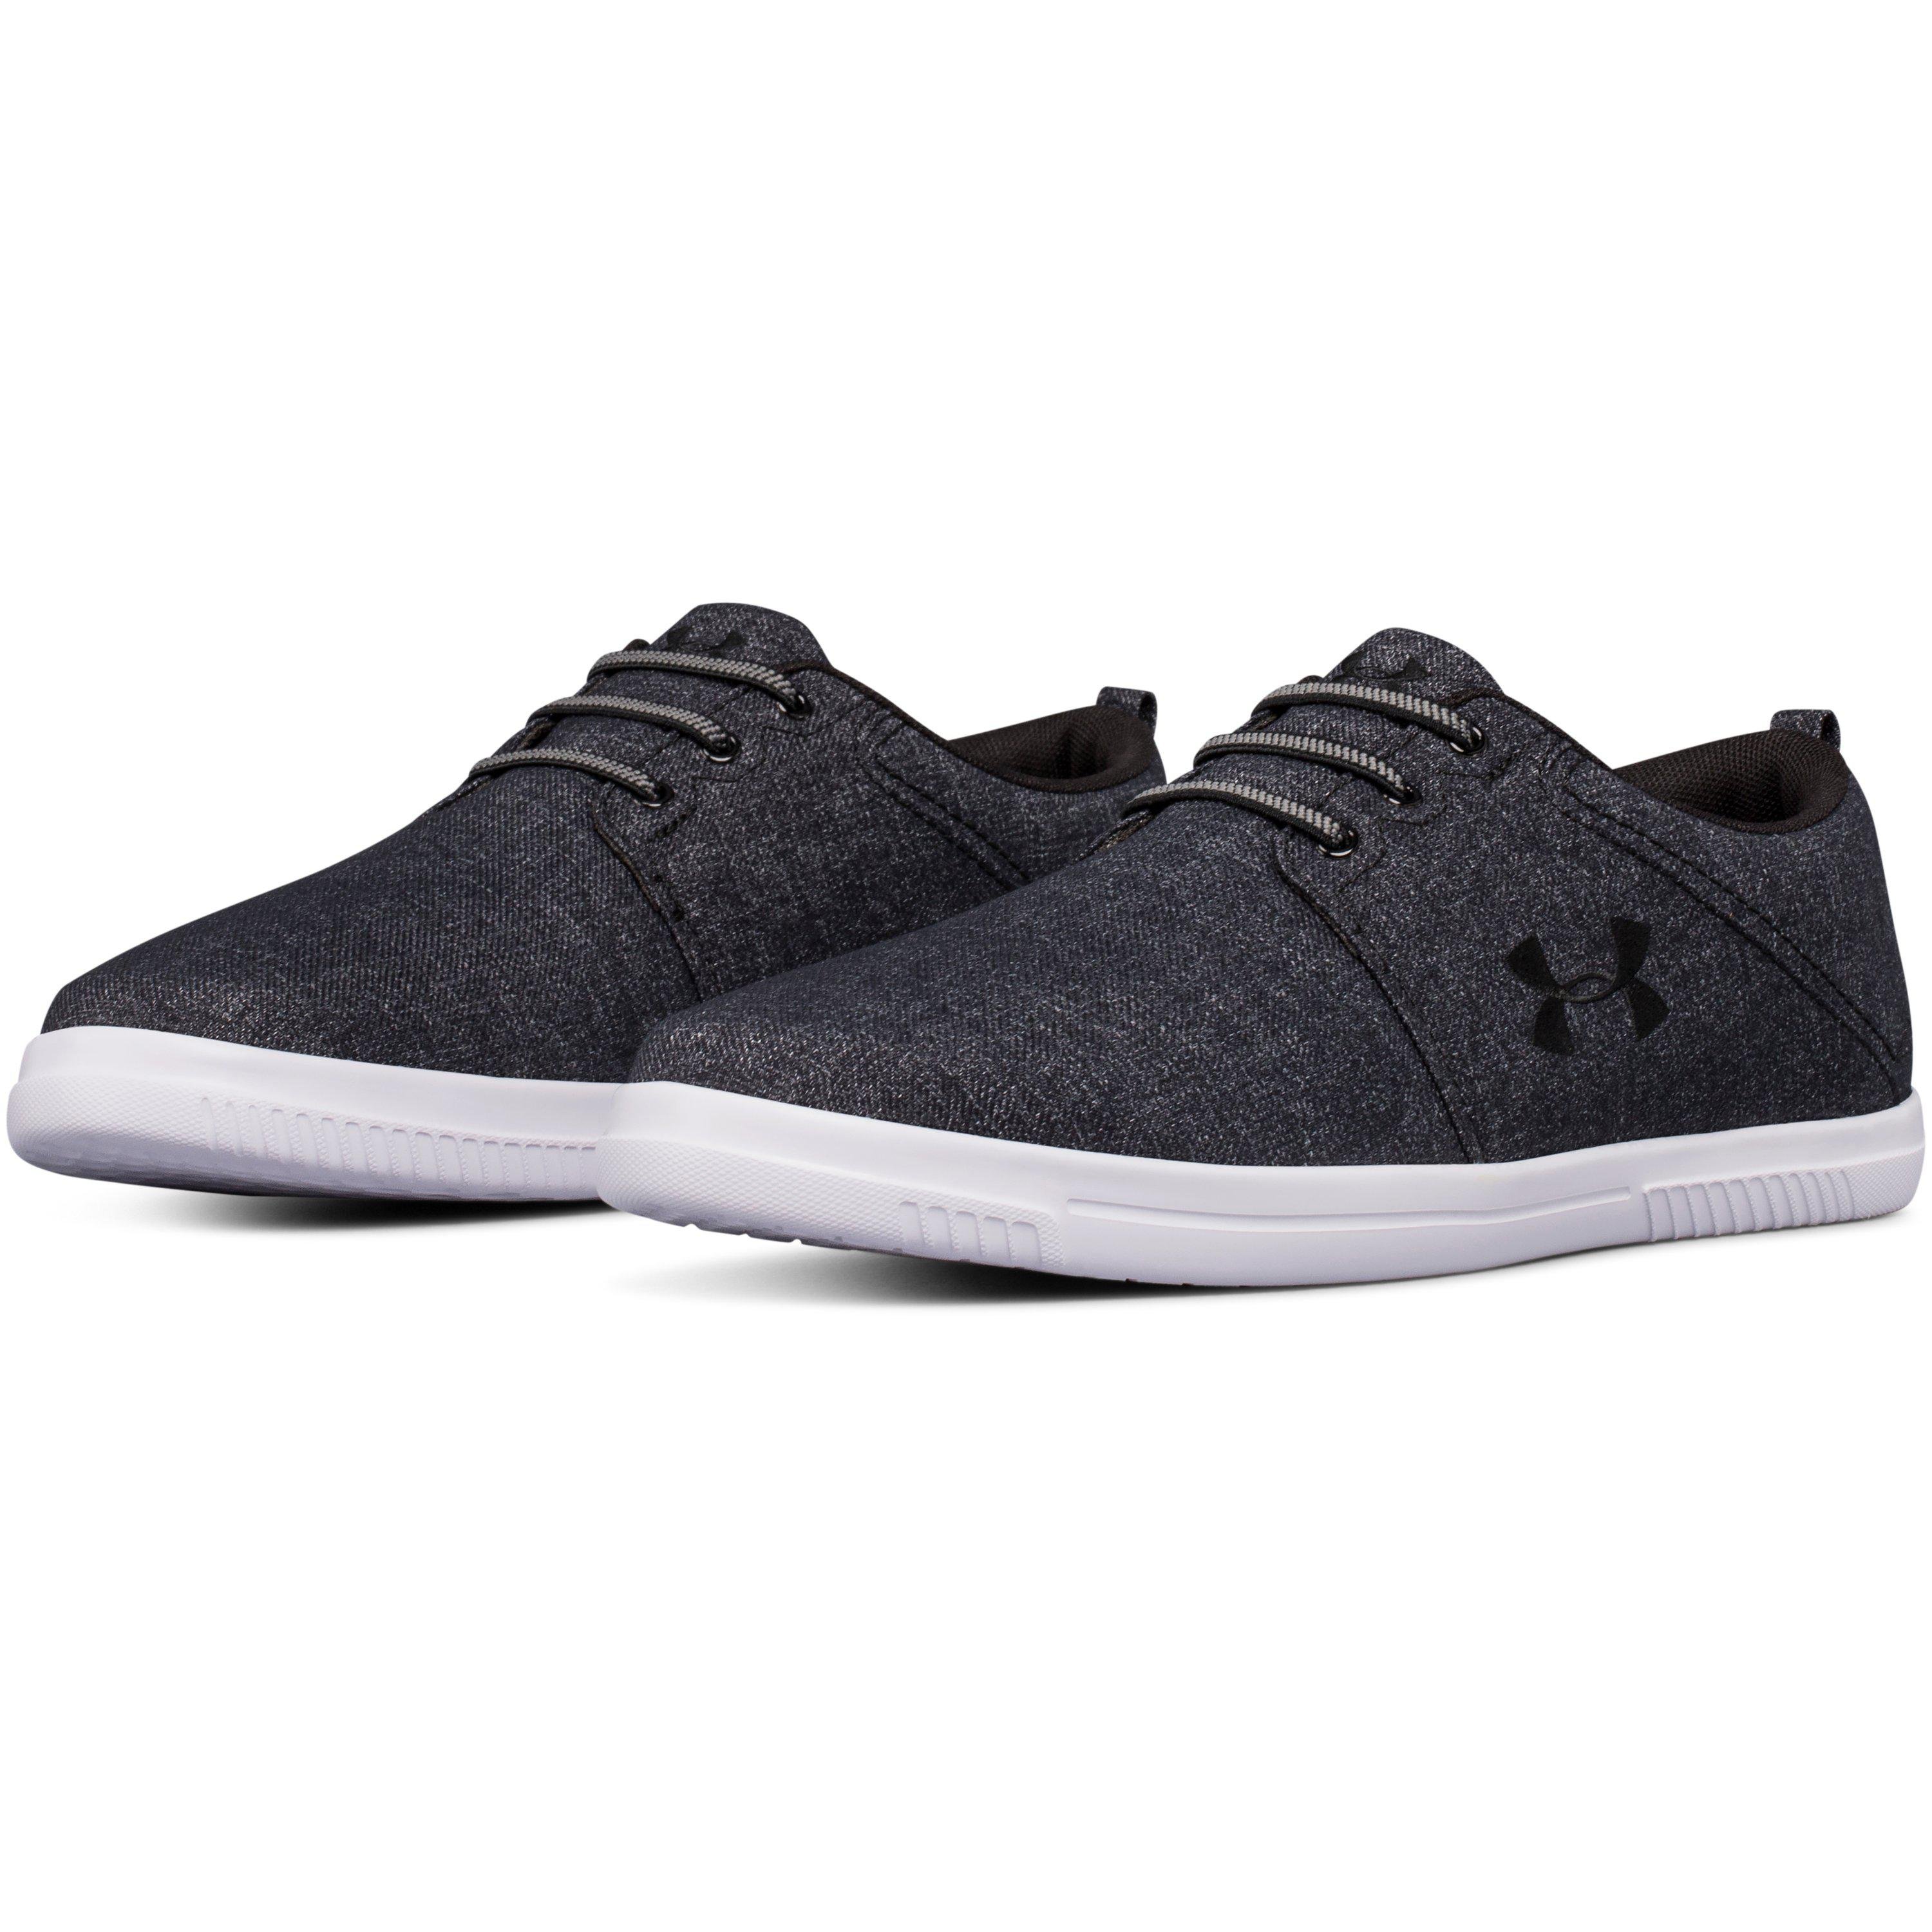 Under Armour Men’s Street Encounter IV traniers **For summer holidays**